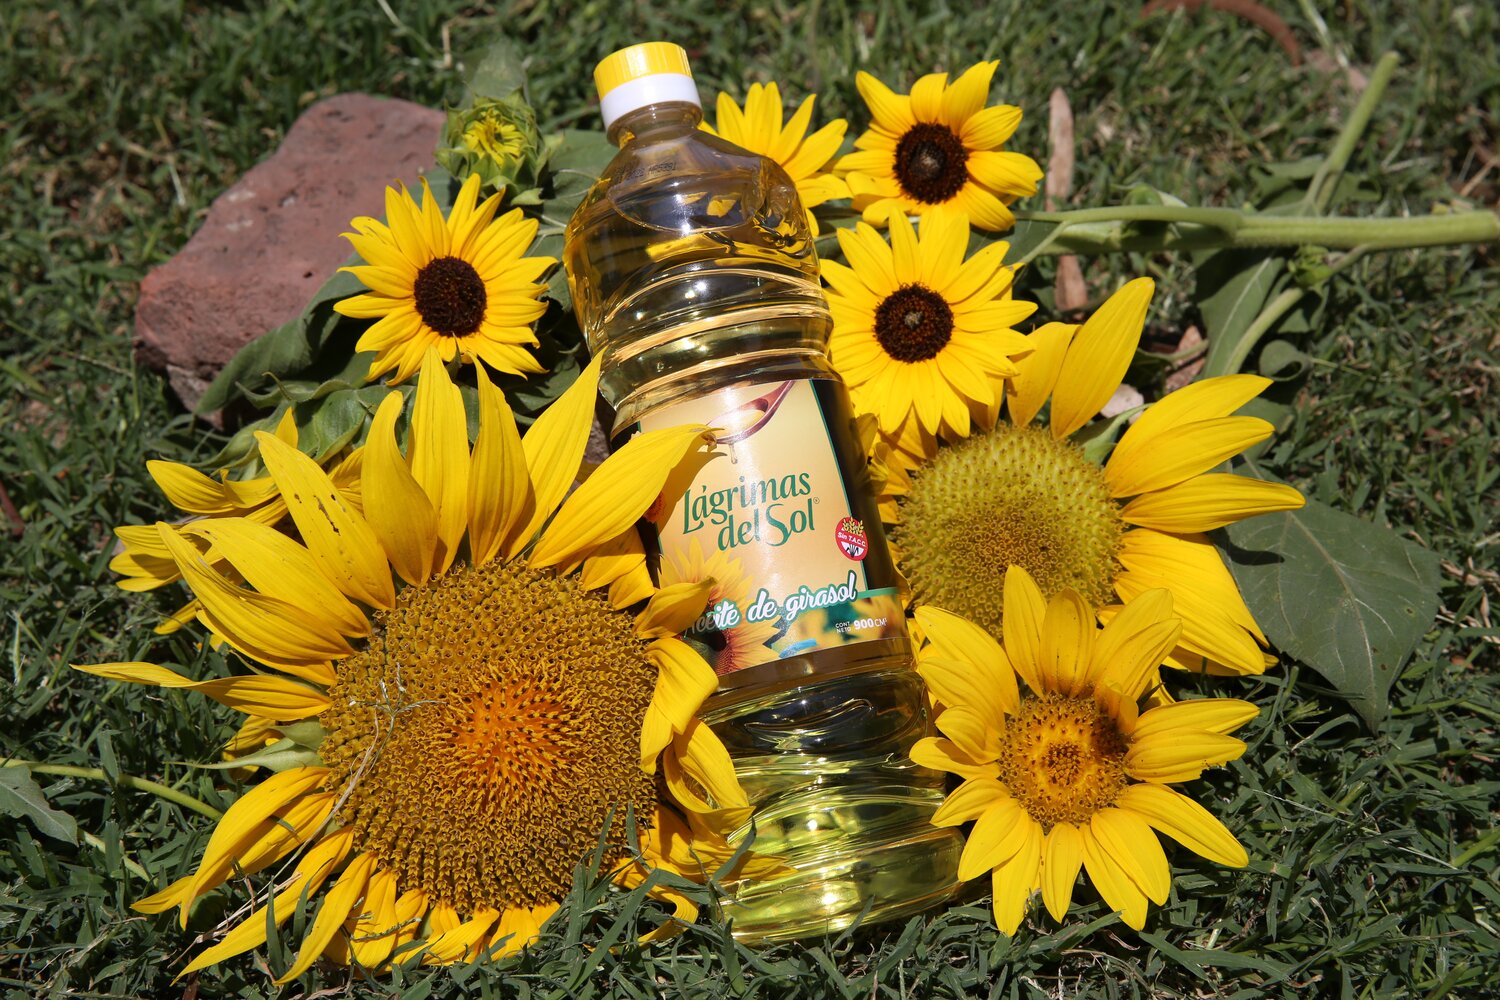 “Lágrimas de Sol” is one of the many sunflower-based products produced and sold by Gente de La Pampa. Sunflower oil is light in color and neutral in flavor; it can withstand high cooking temperatures, which makes it a good all-purpose oil. More importantly, it is low in saturated fat, and, thus, a heart-friendly option.